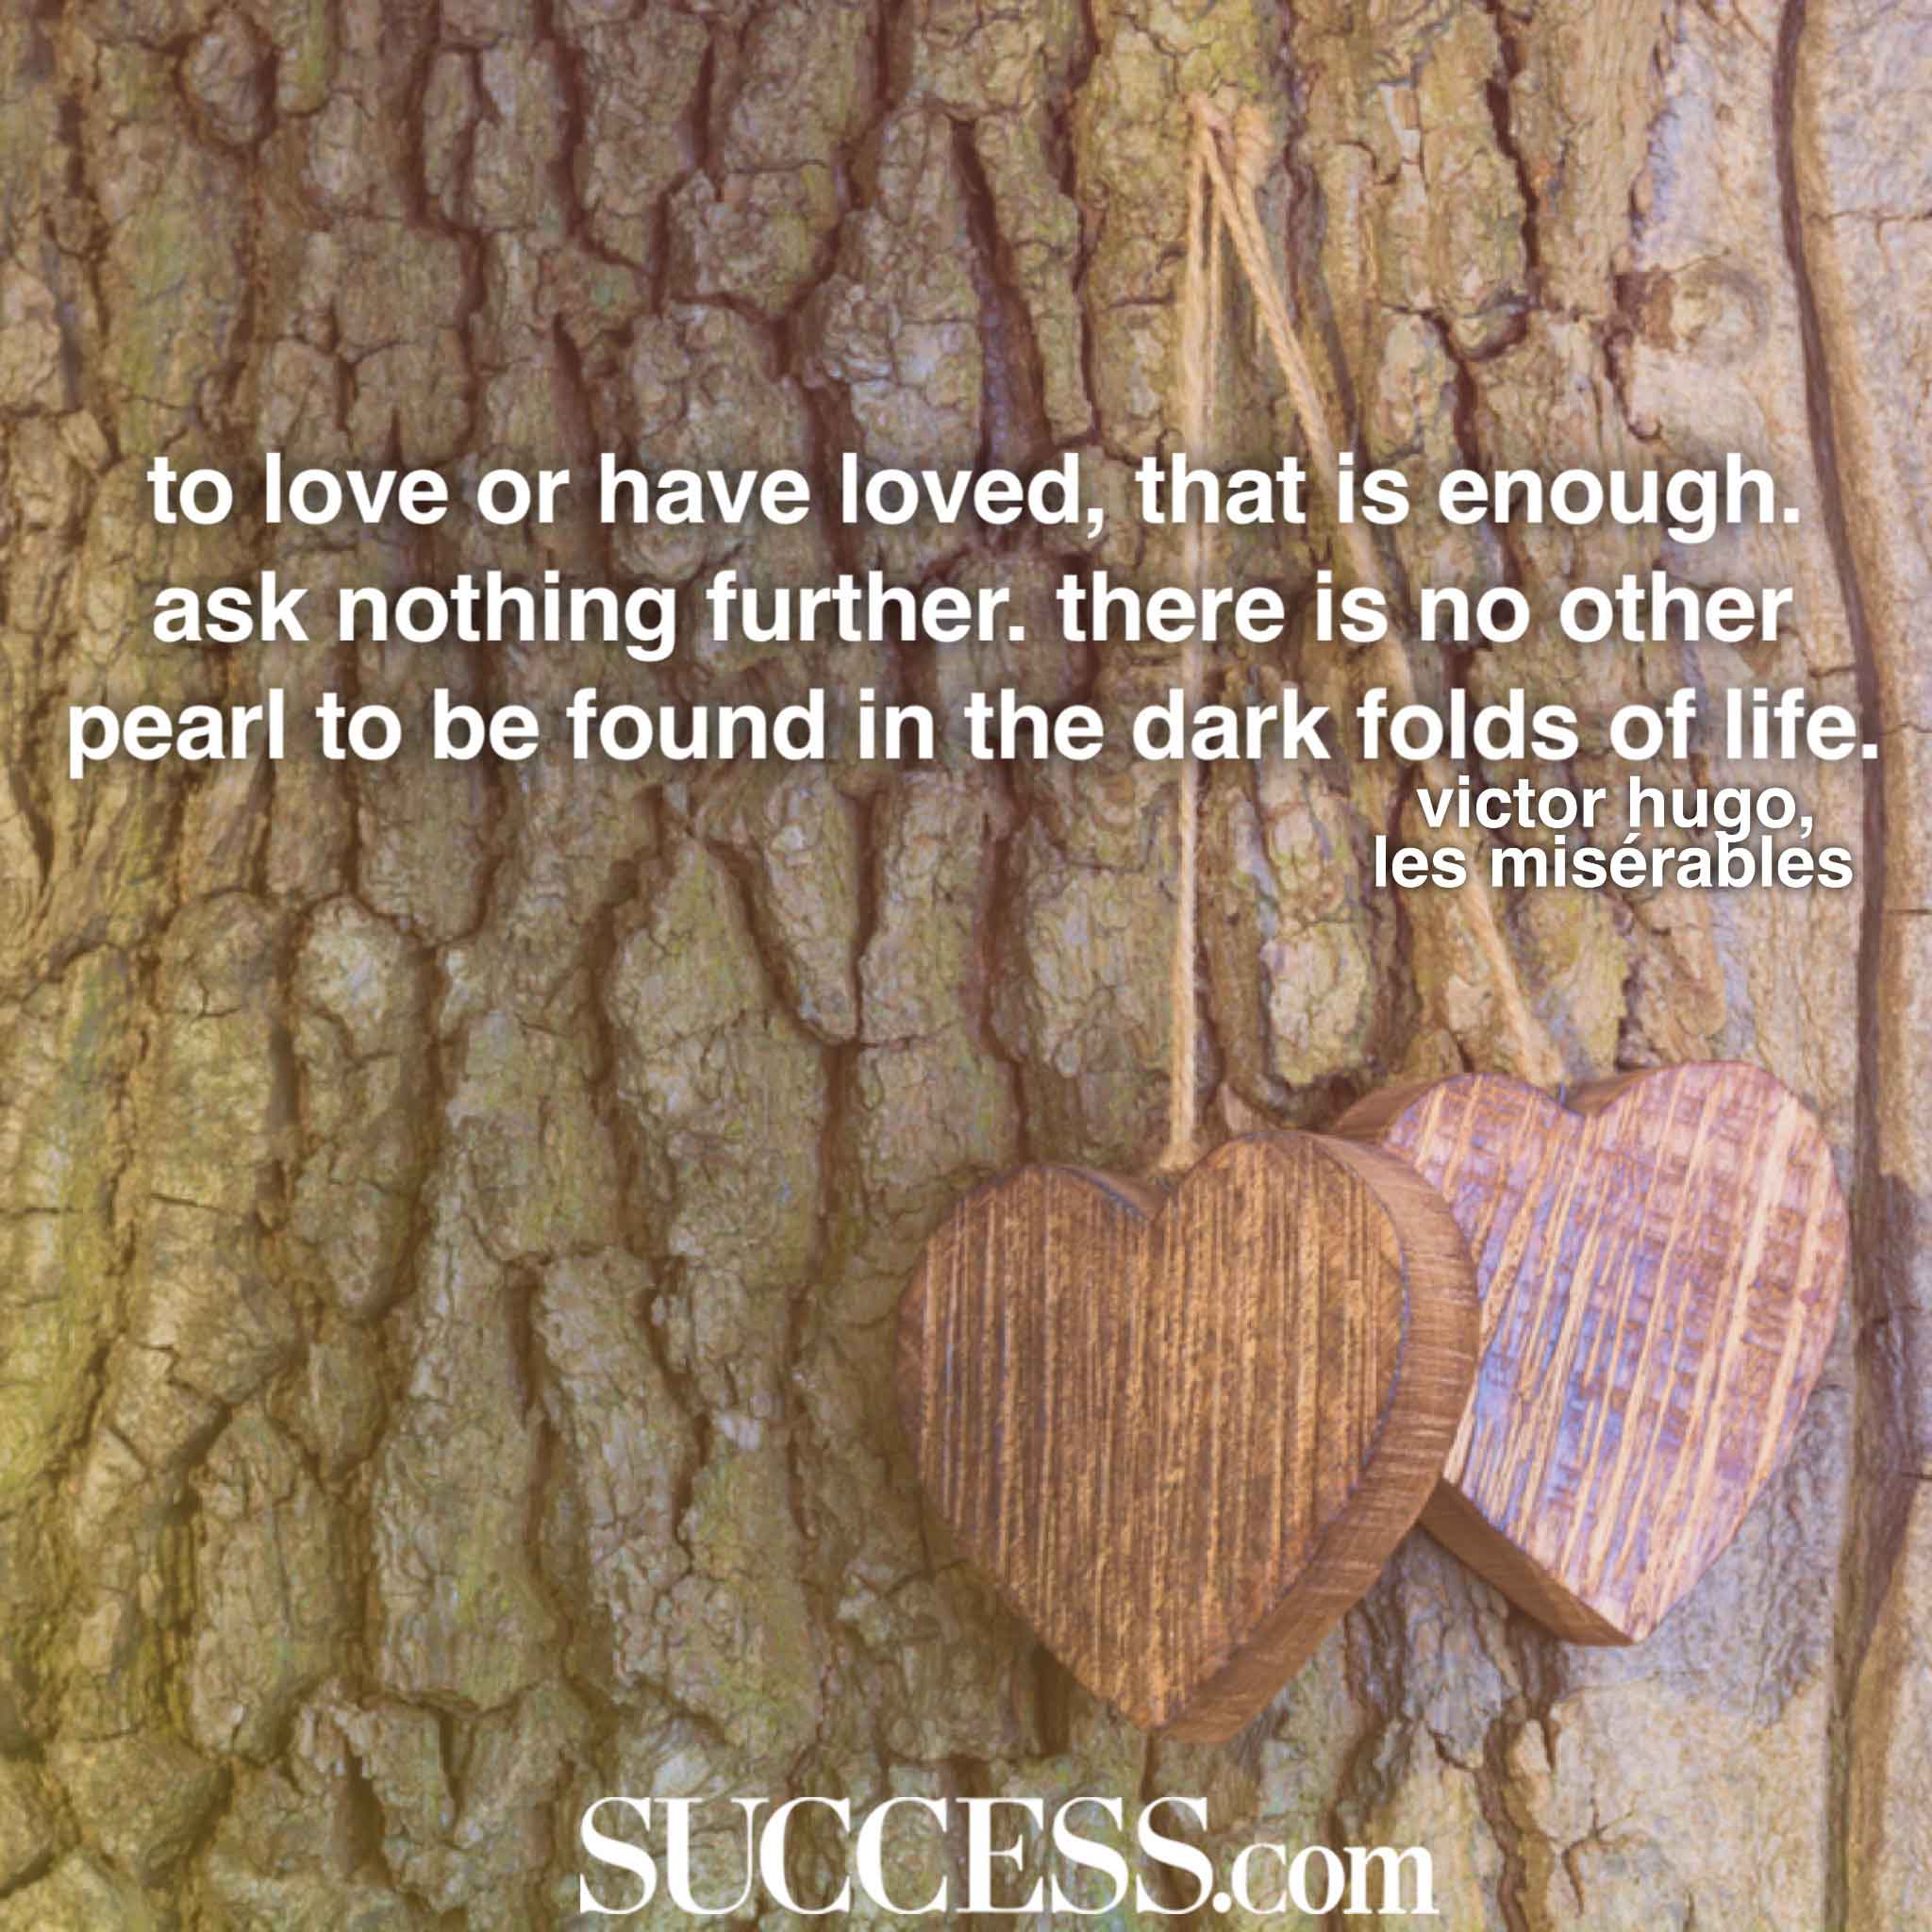 eternal love quotes shakespeare